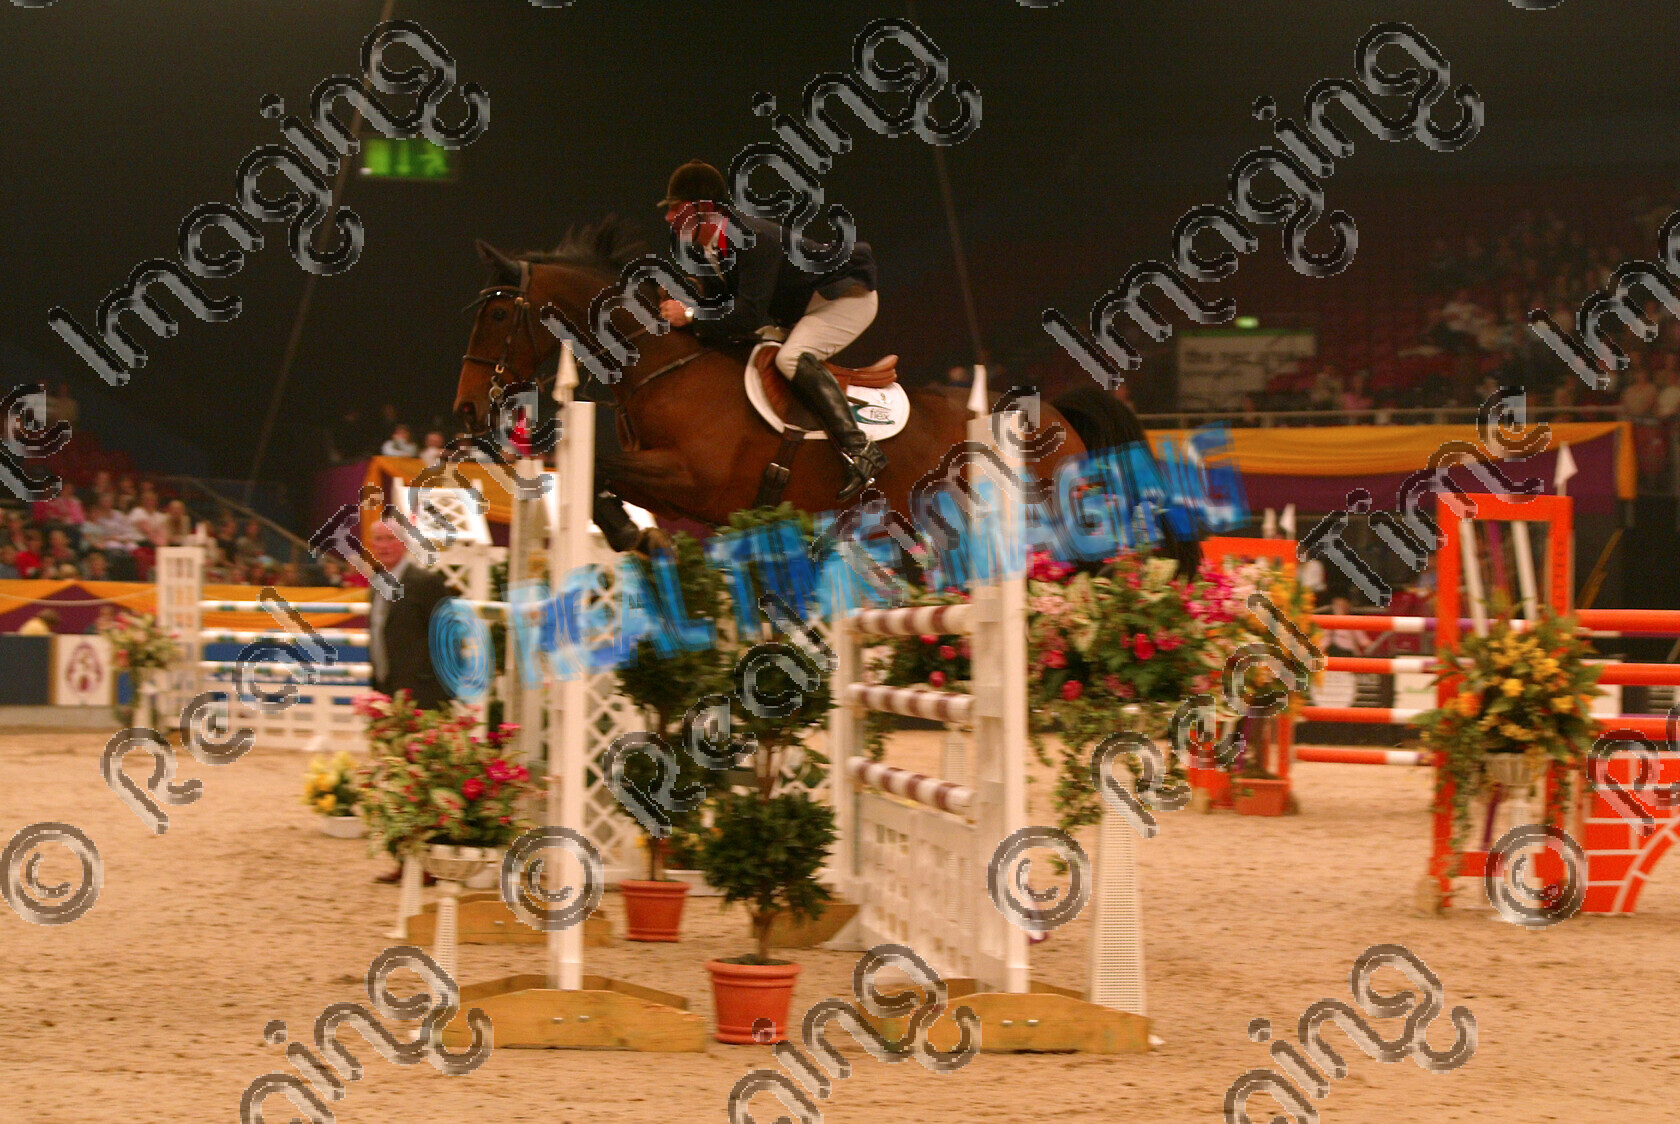 S05-67-T5-004 
 HOYS 2005: The Xerox Special Event Services Cup winner 
 Keywords: horse of the year show 2005 05 hoys saturday 15 10 october 20 Xerox Special Event Services Cup winner 9 Marleen Geoff Luckett bay mare jump jumping fence action showjumping showjumper